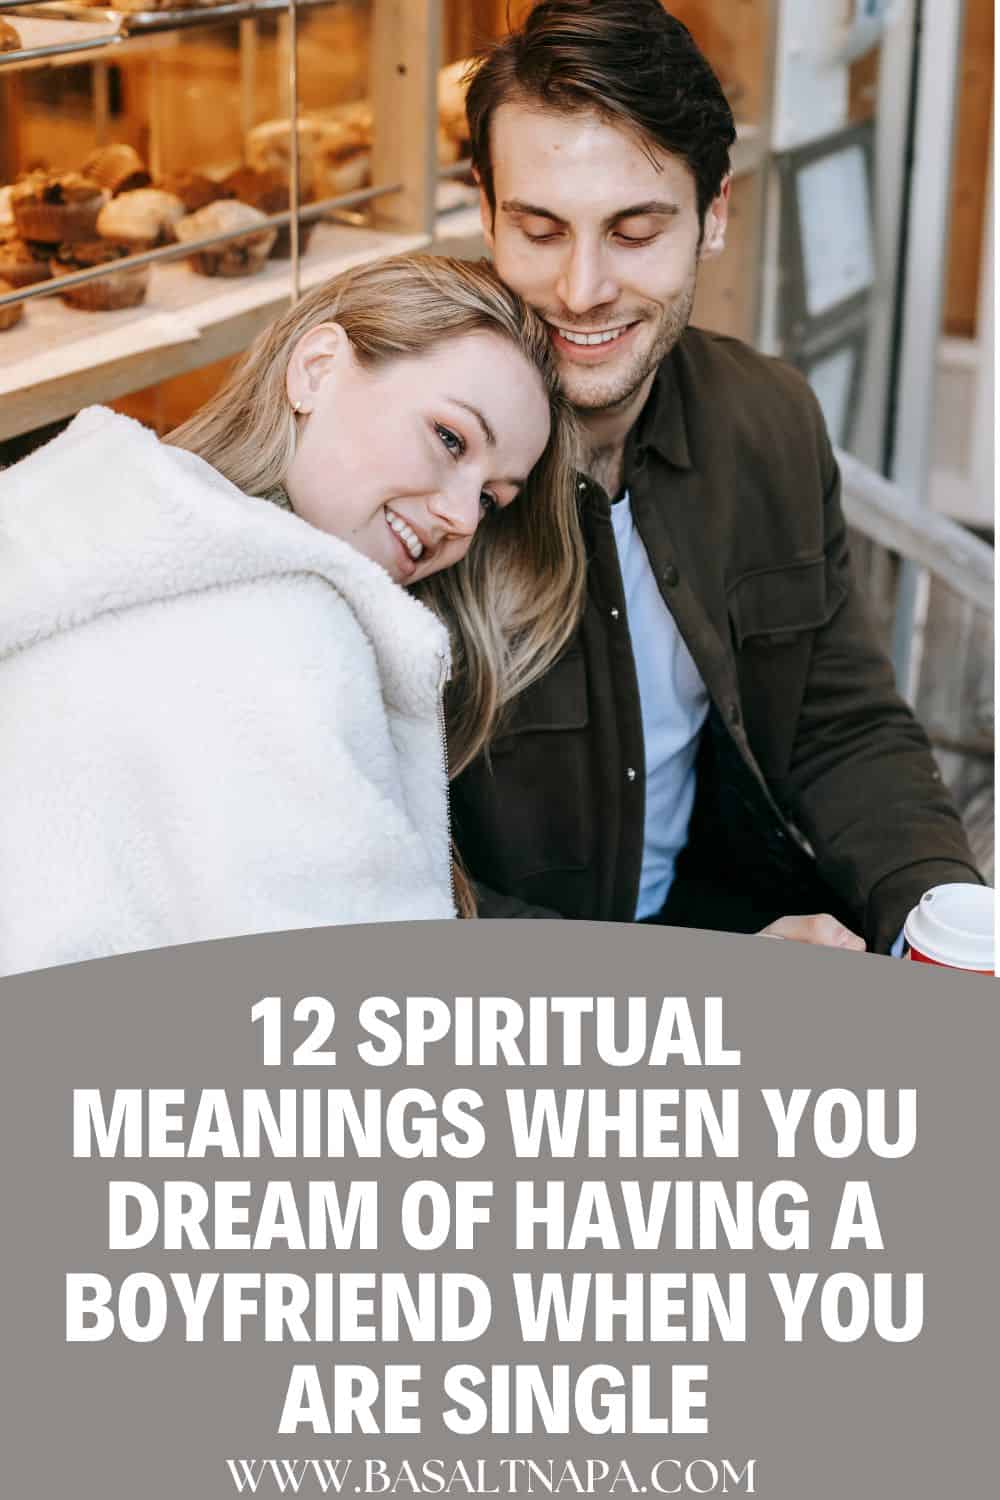 12 Spiritual Meanings When You Dream Of Having A Boyfriend When You Are Single